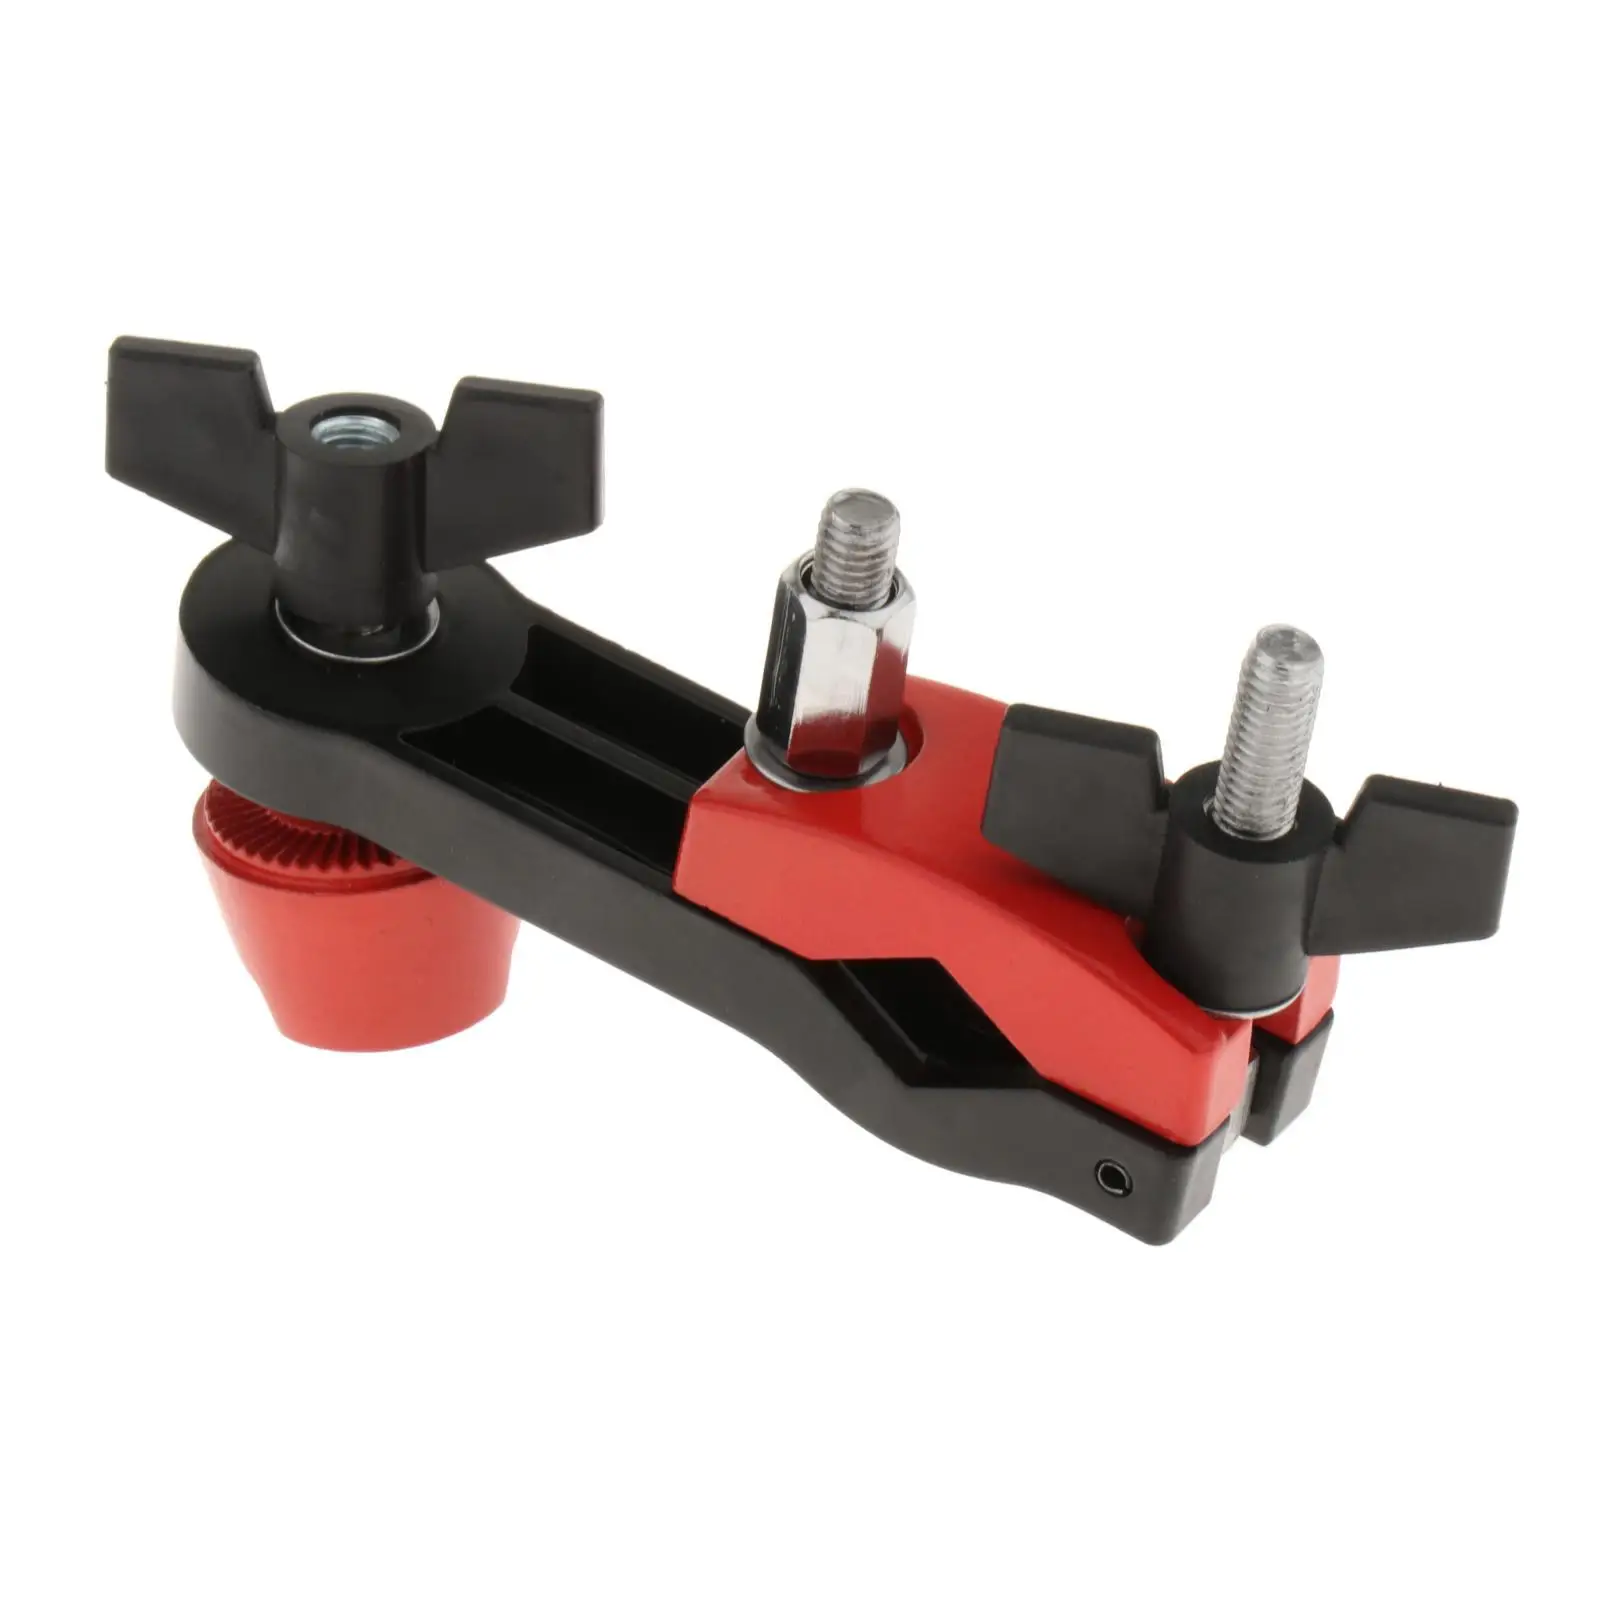 Drum Set Clamp Drum Connecting Clip Practice Tool Portable Cymbal Stand Mount Holder Drum Multi Clamp Drum Cymbal Arm Bracket